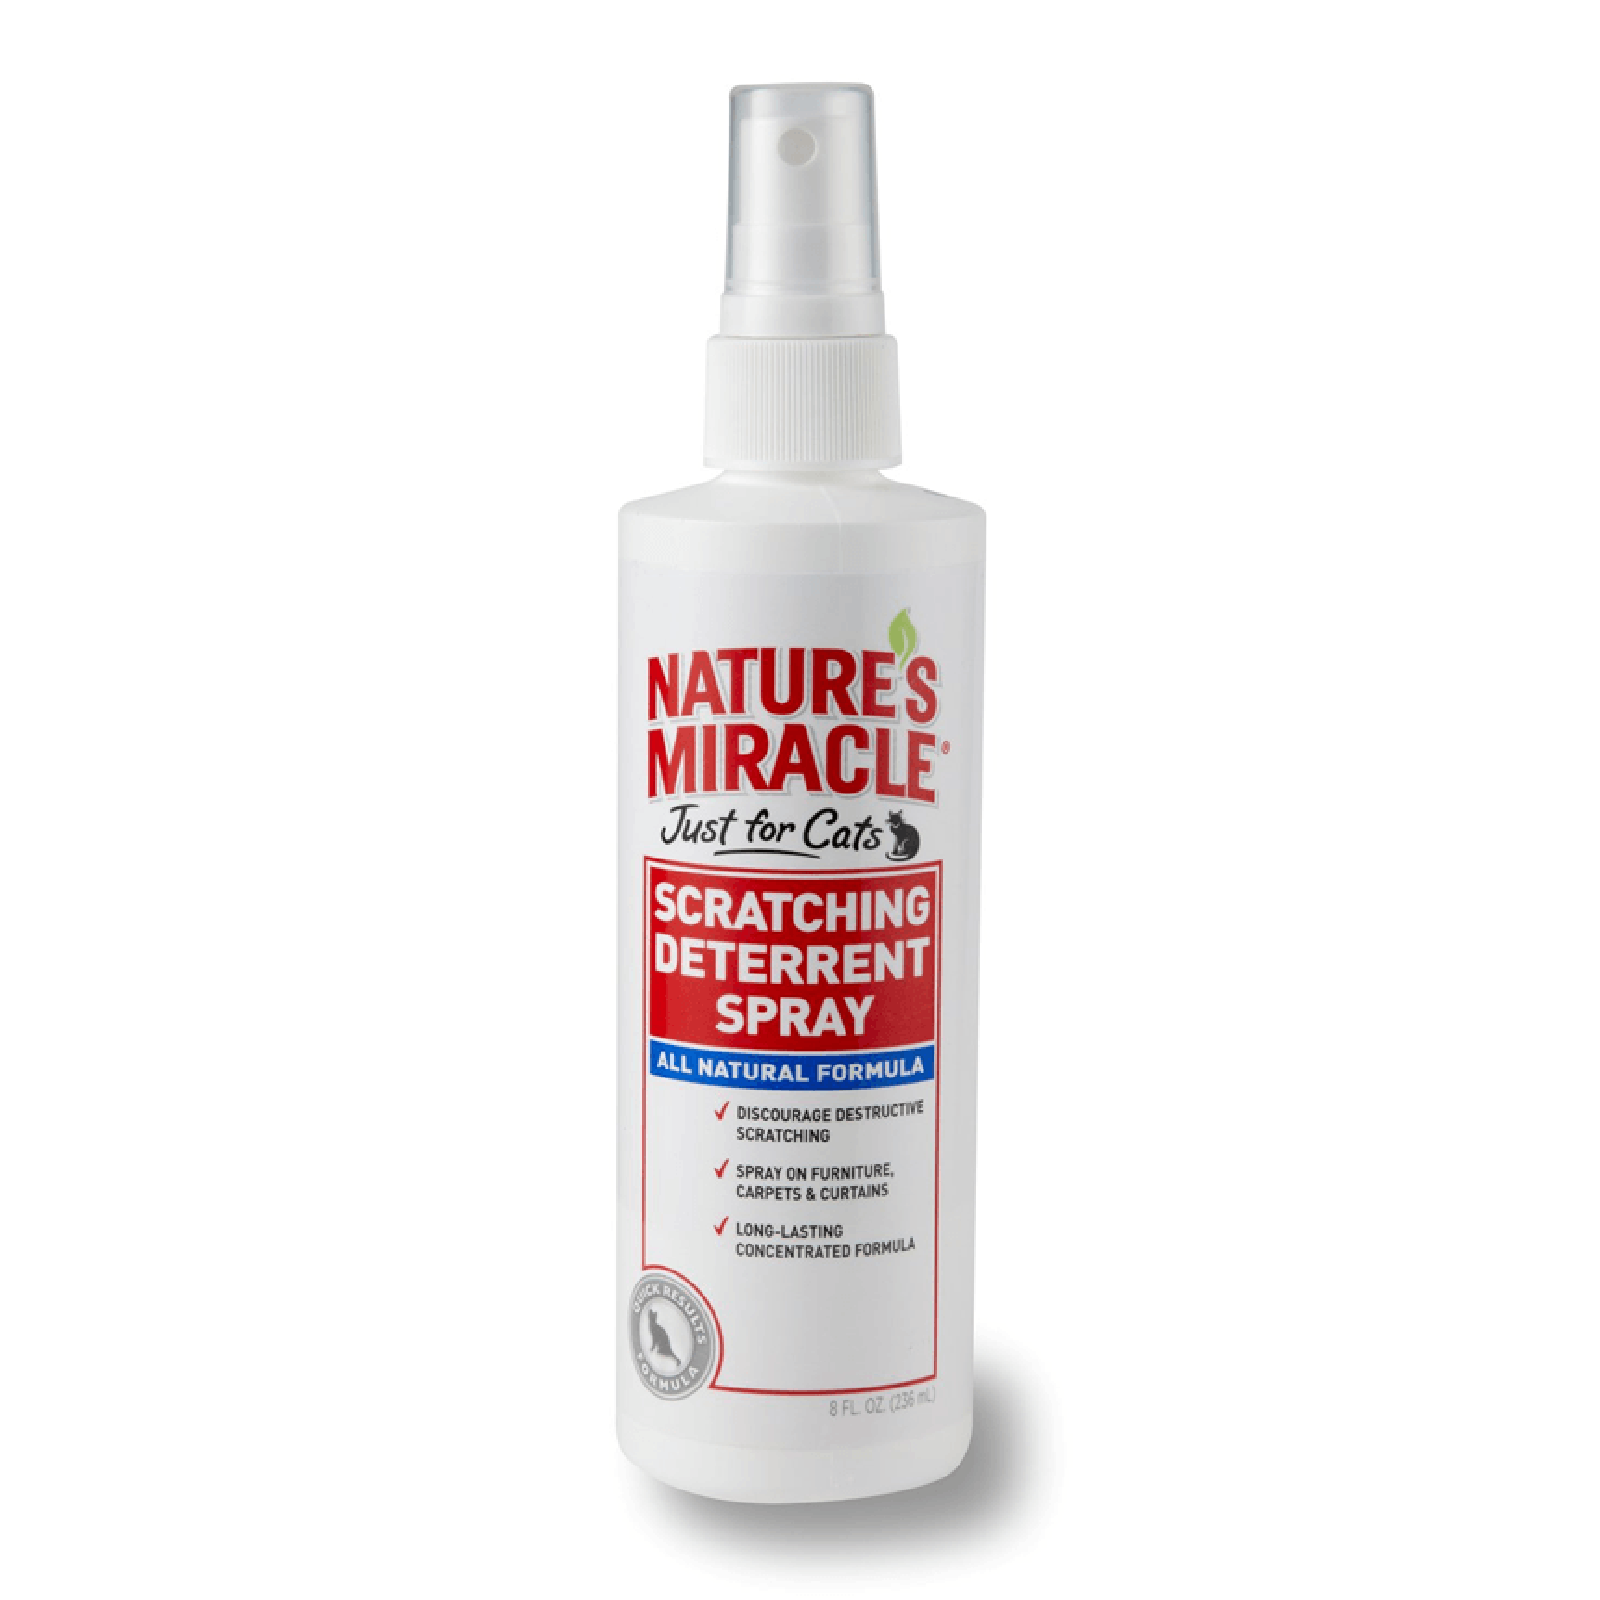 Natures Miracle Scratching Deterrent Spray